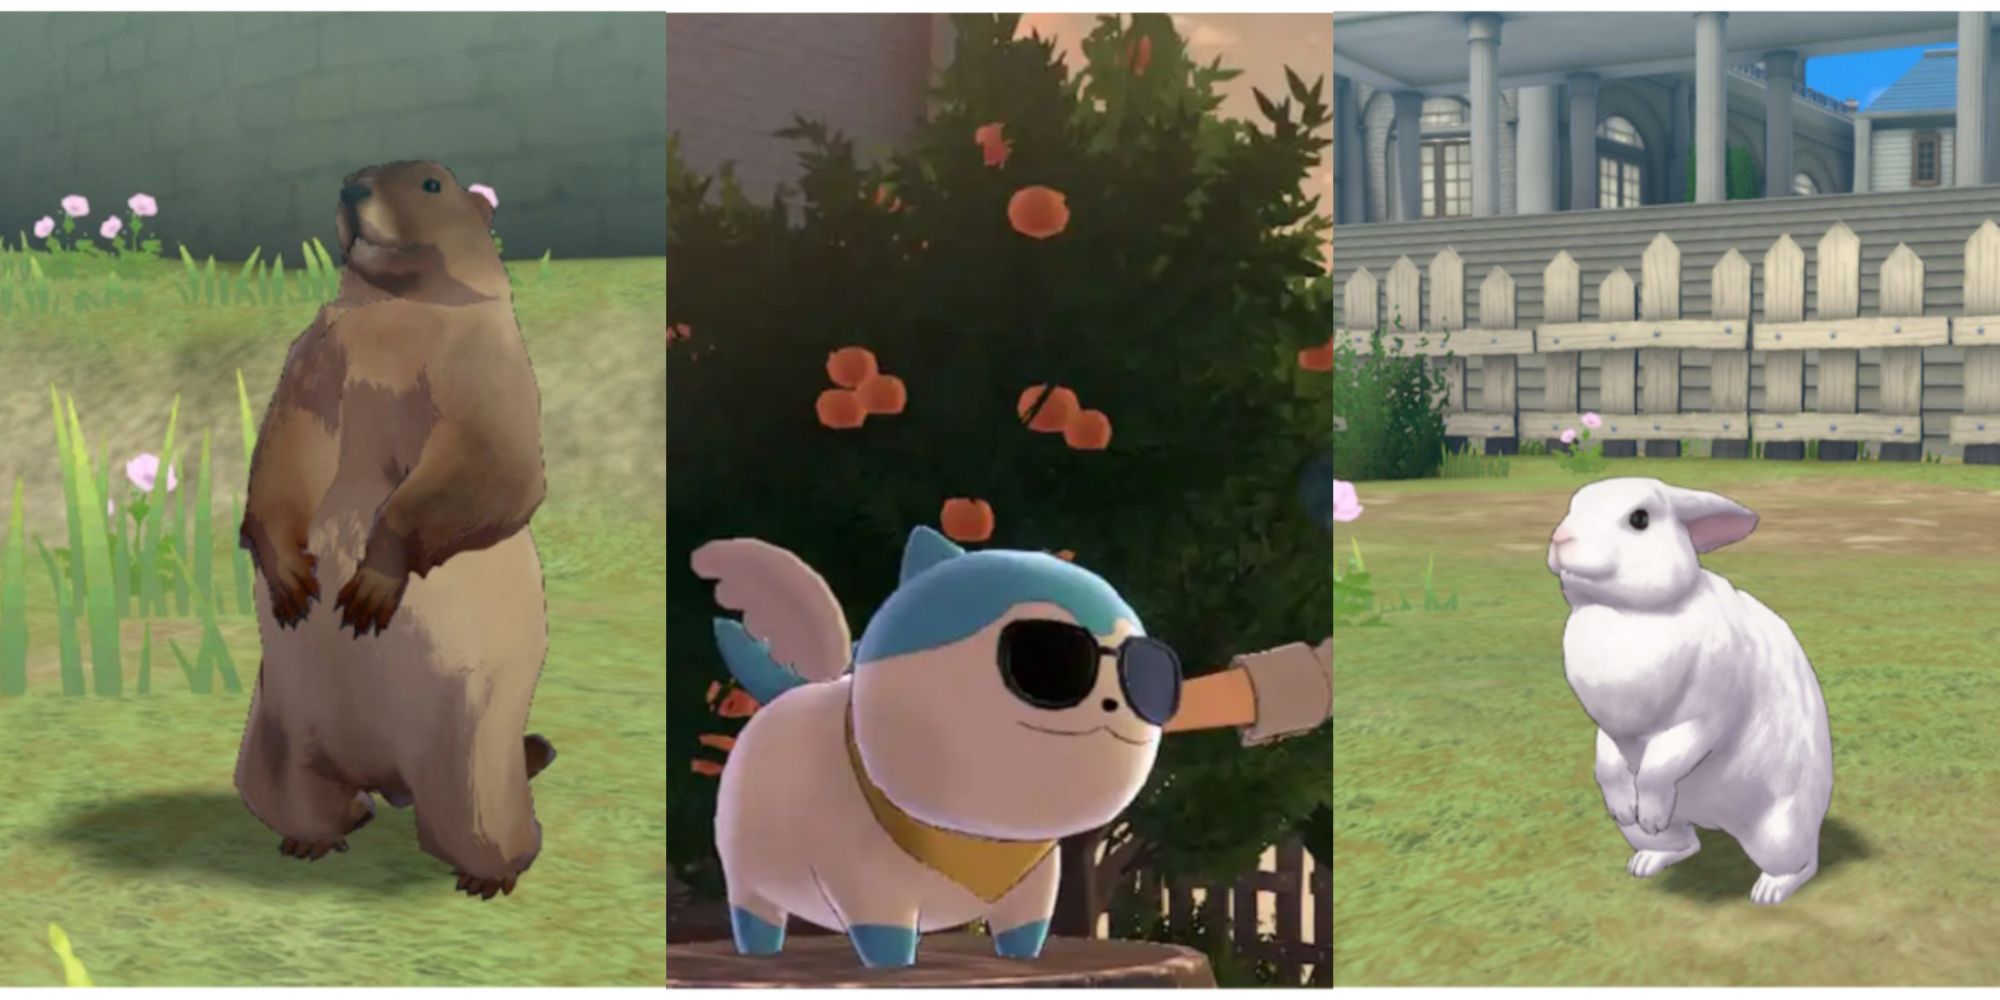 three images spliced together. from left to right a marmot in a field around midday on hind legs, sommie with sunglasses and wings being pet from offscreen at sunset in a peach grove, and a white rabbit on its hind legs near a fence around midday